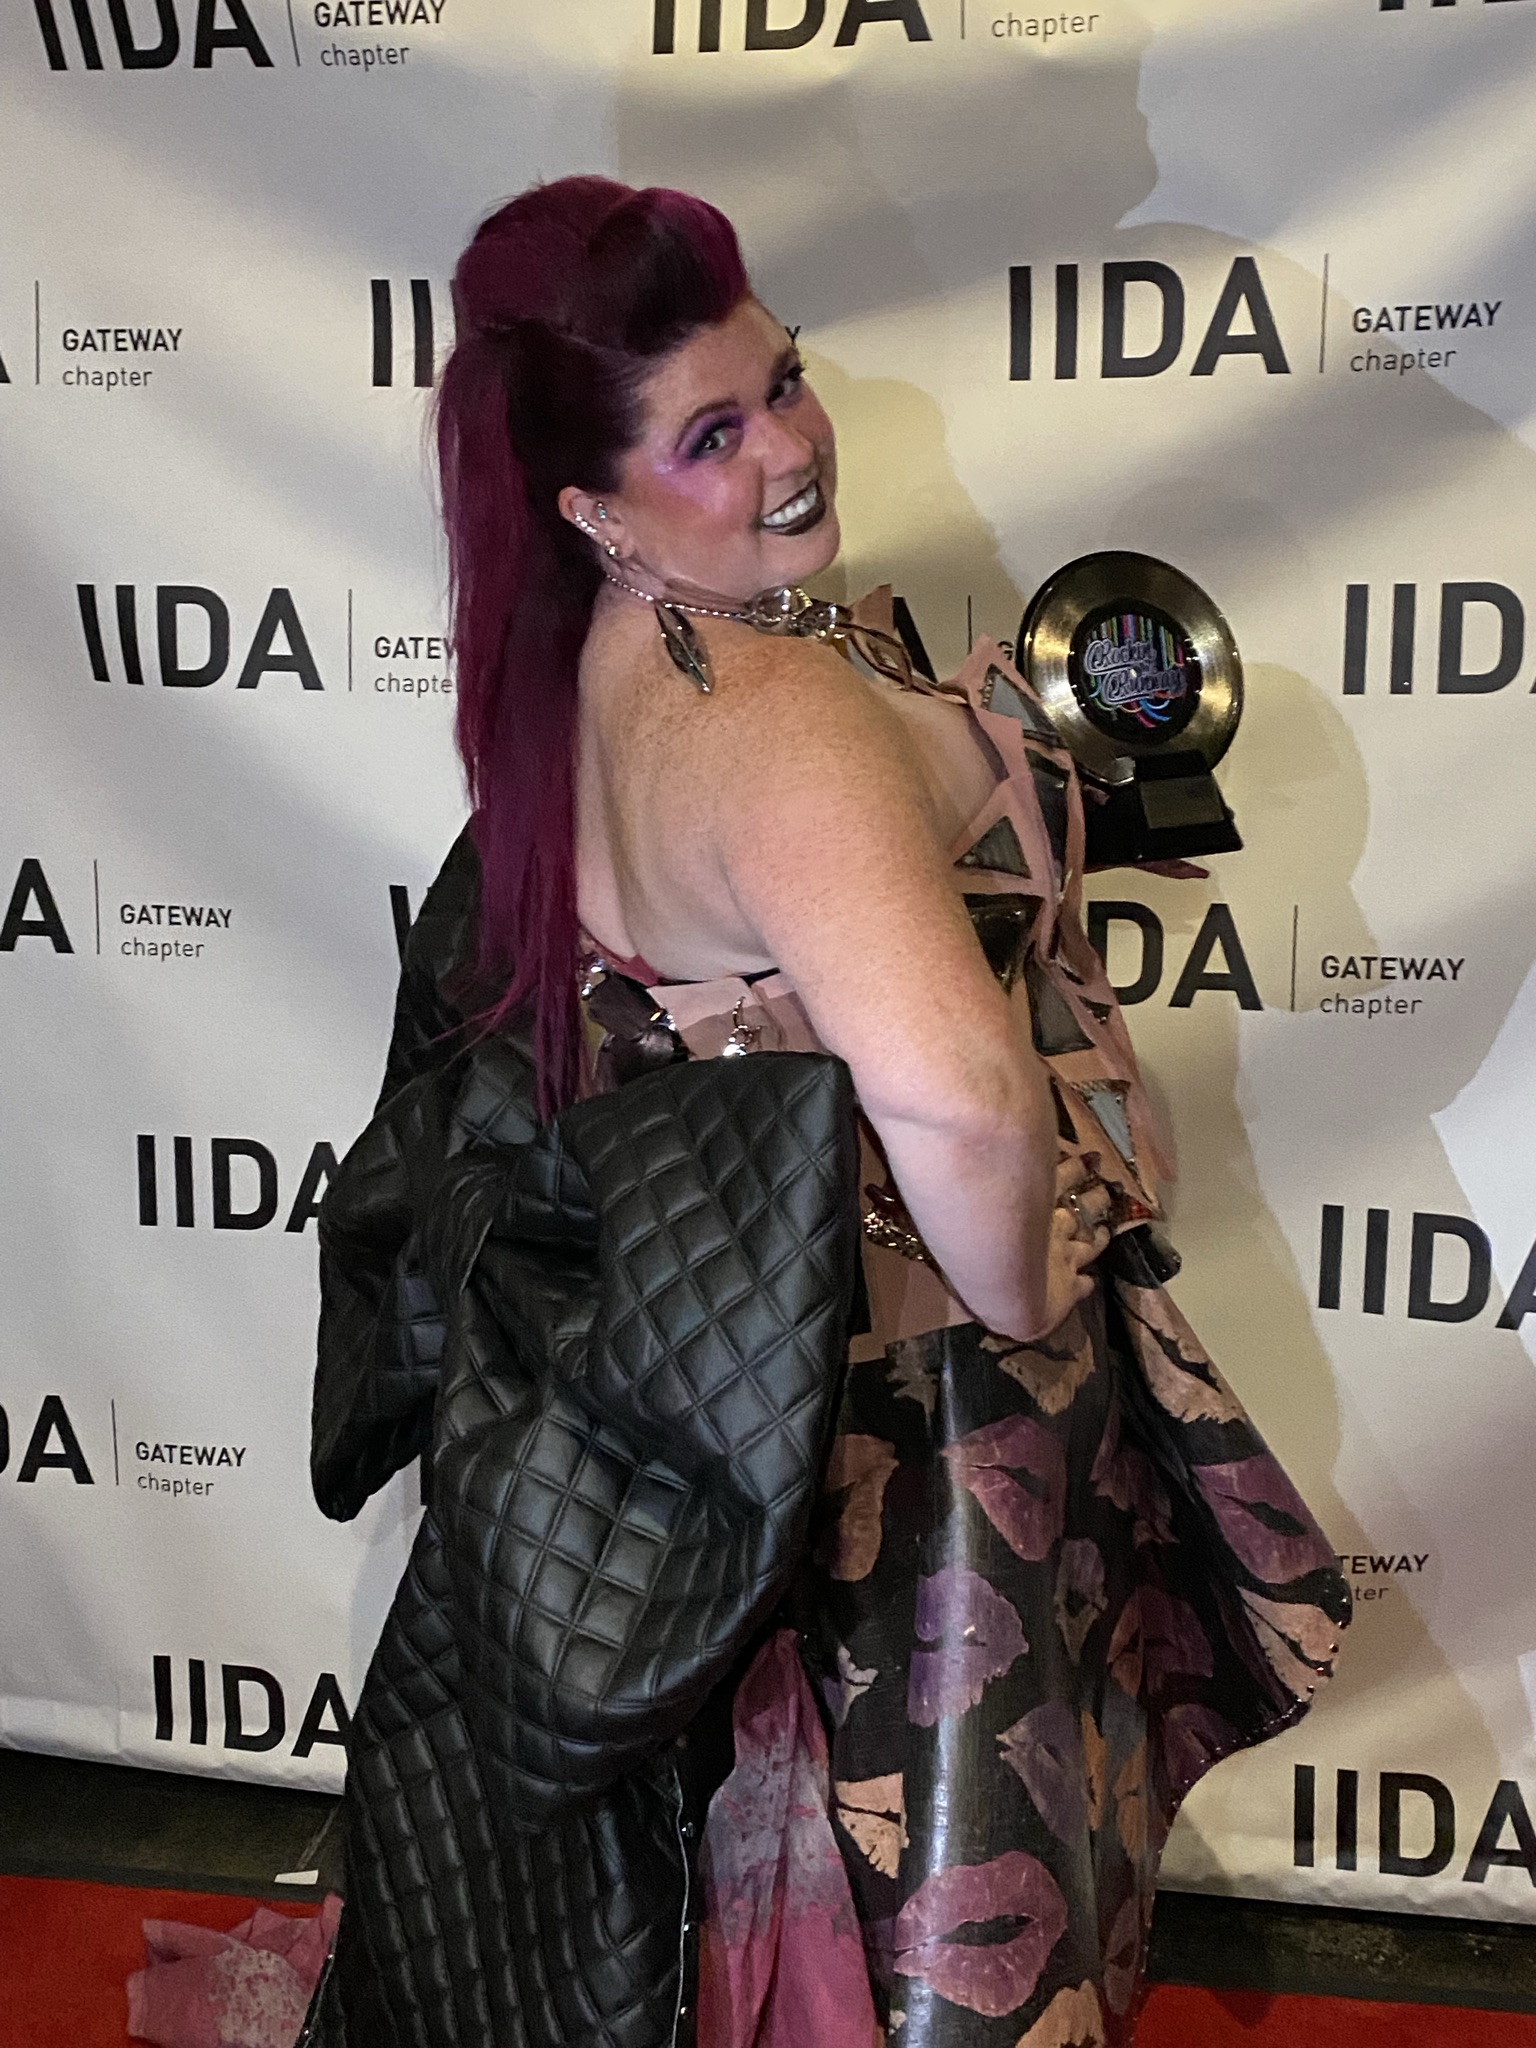 Katie Hepting showing off the back of her dress on the IIDA red carpet